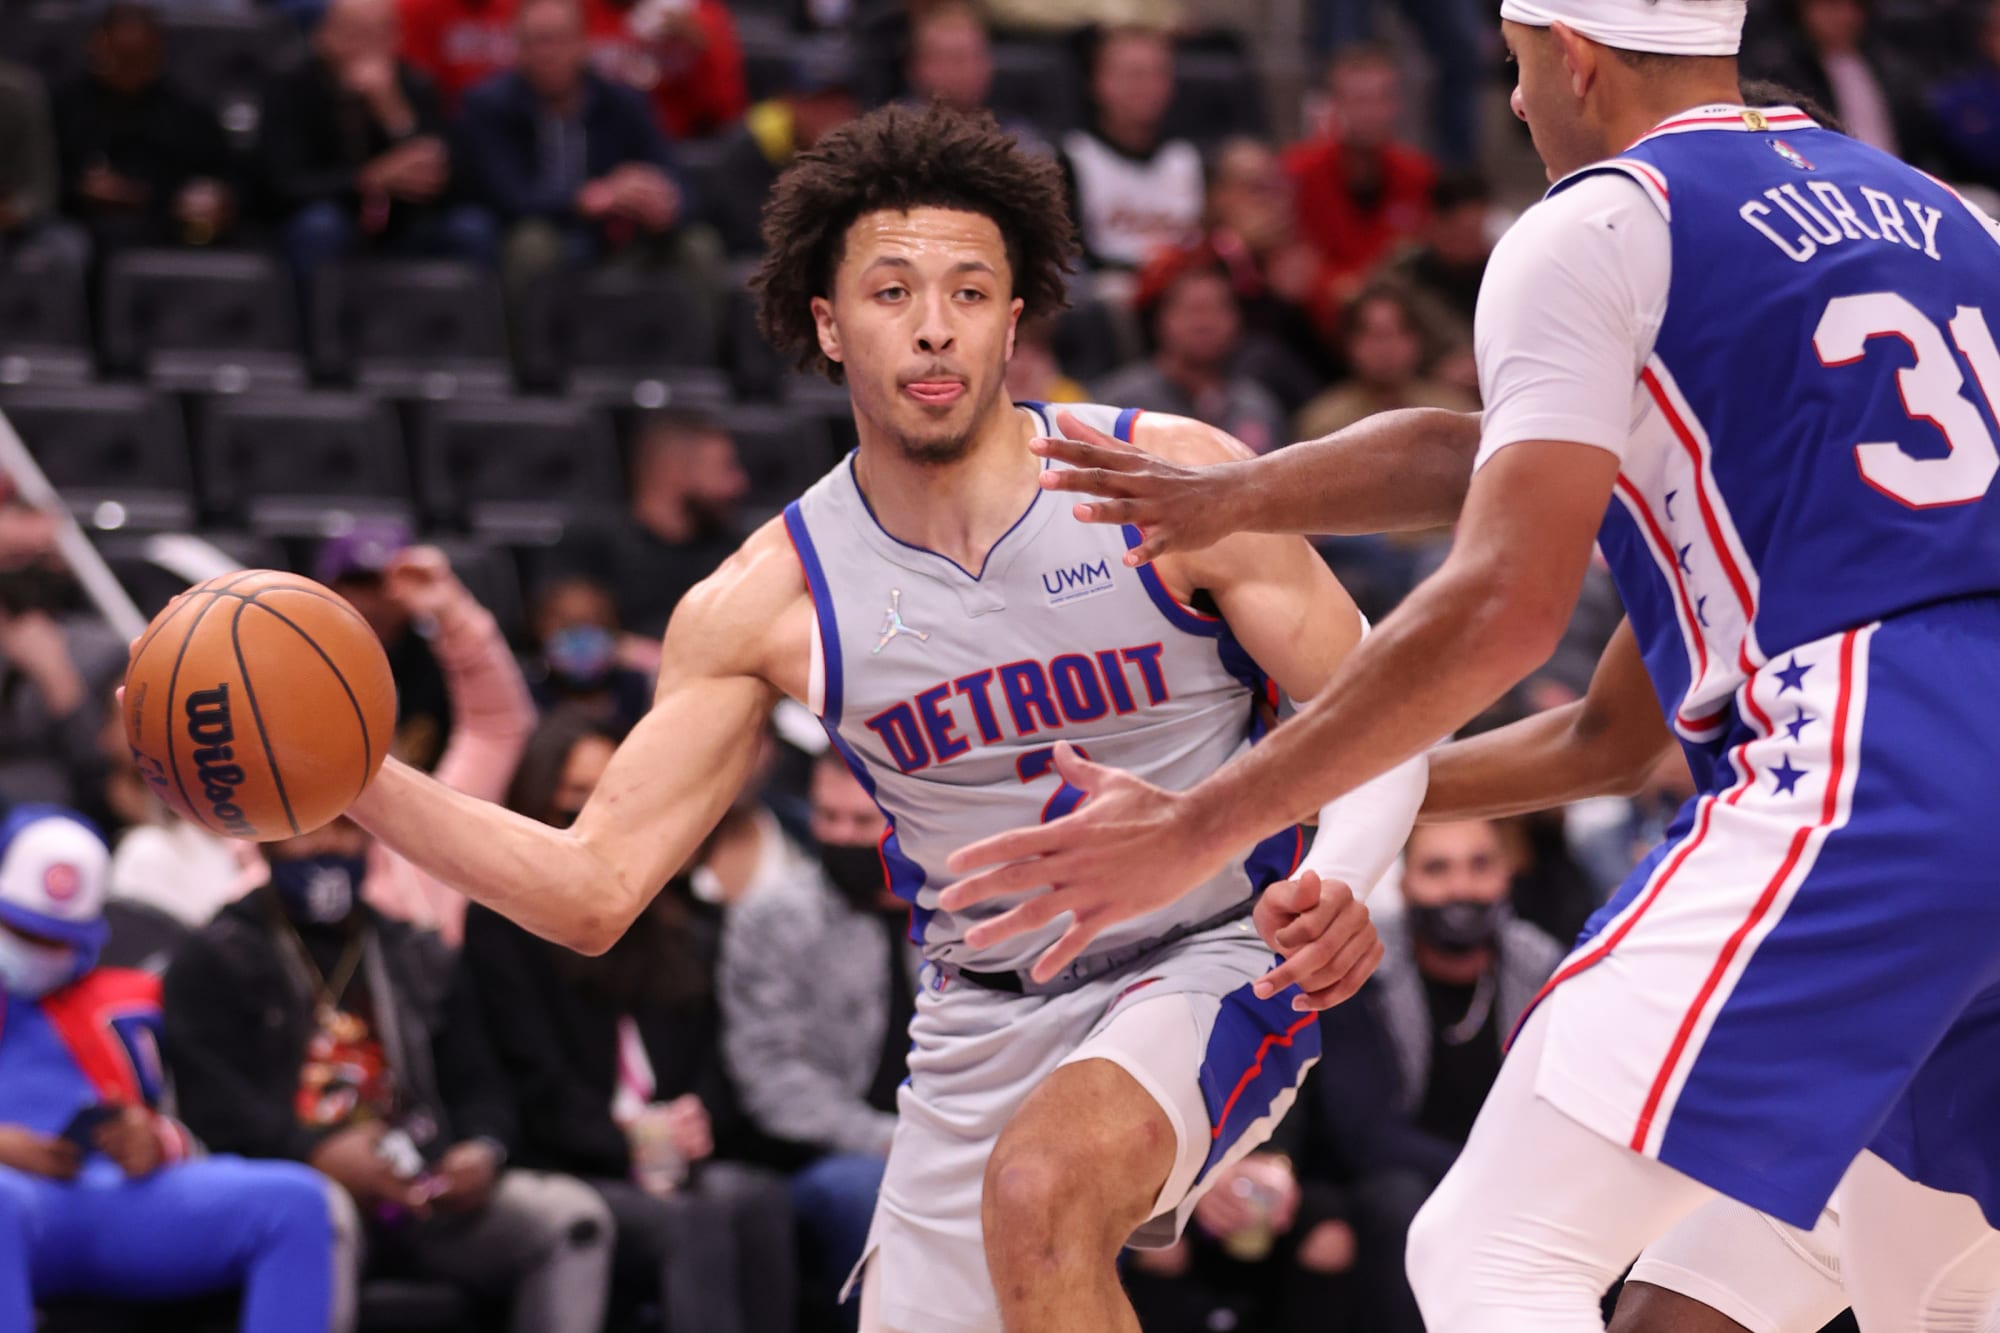 Detroit Pistons: Cade Cunningham makes history in his 3rd game